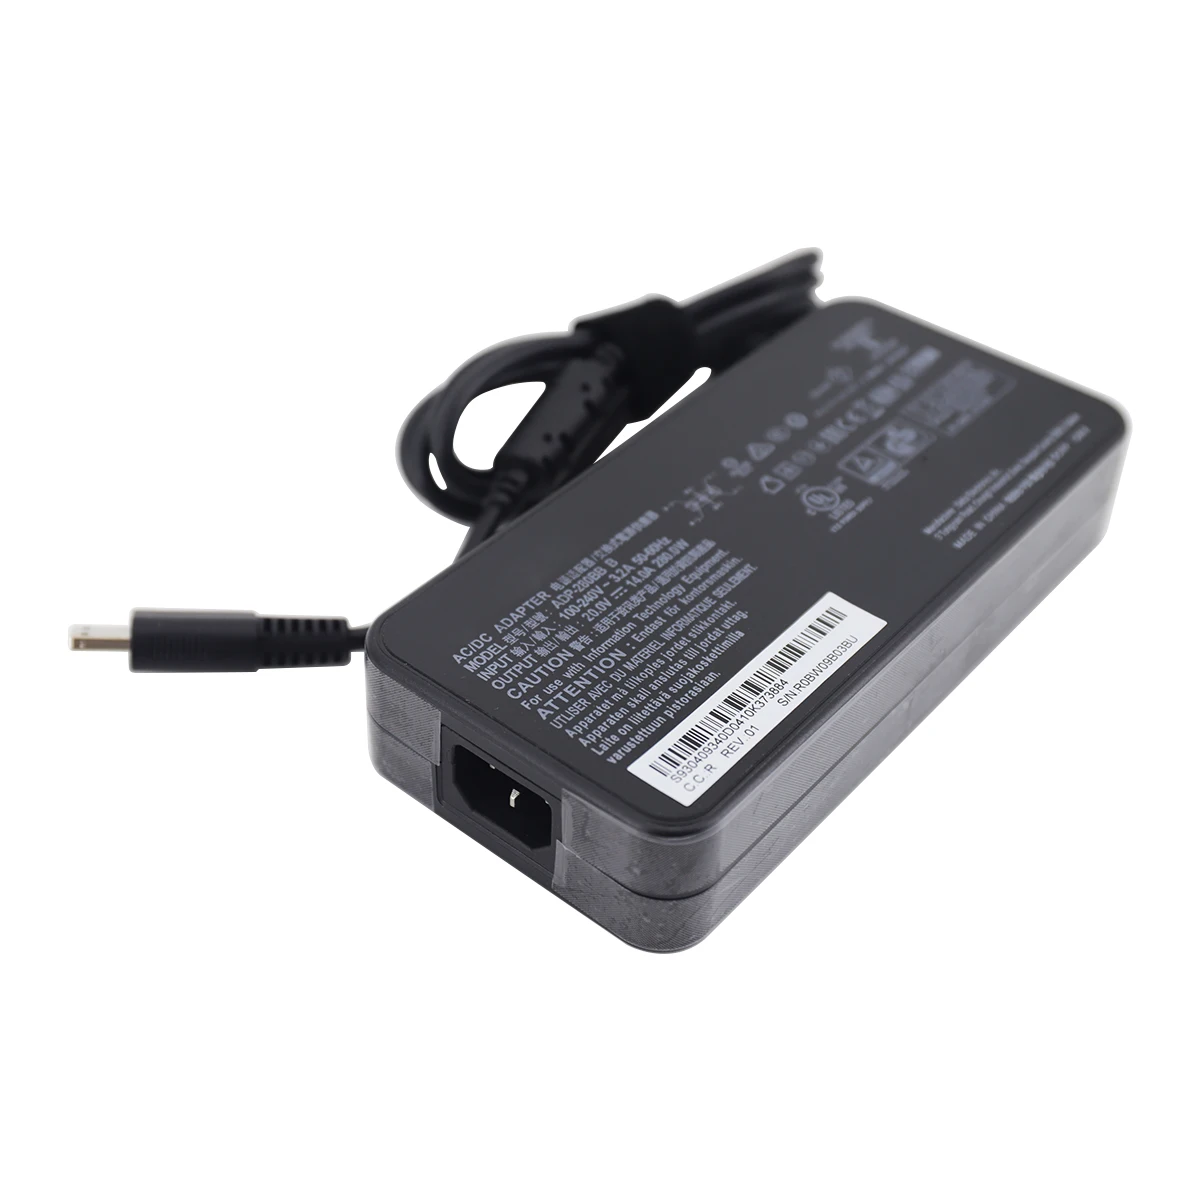 

20V 14A 280W AC Adapter Charger for Delta ADP-280BB B Special Rectangle3 Tip Power Supply